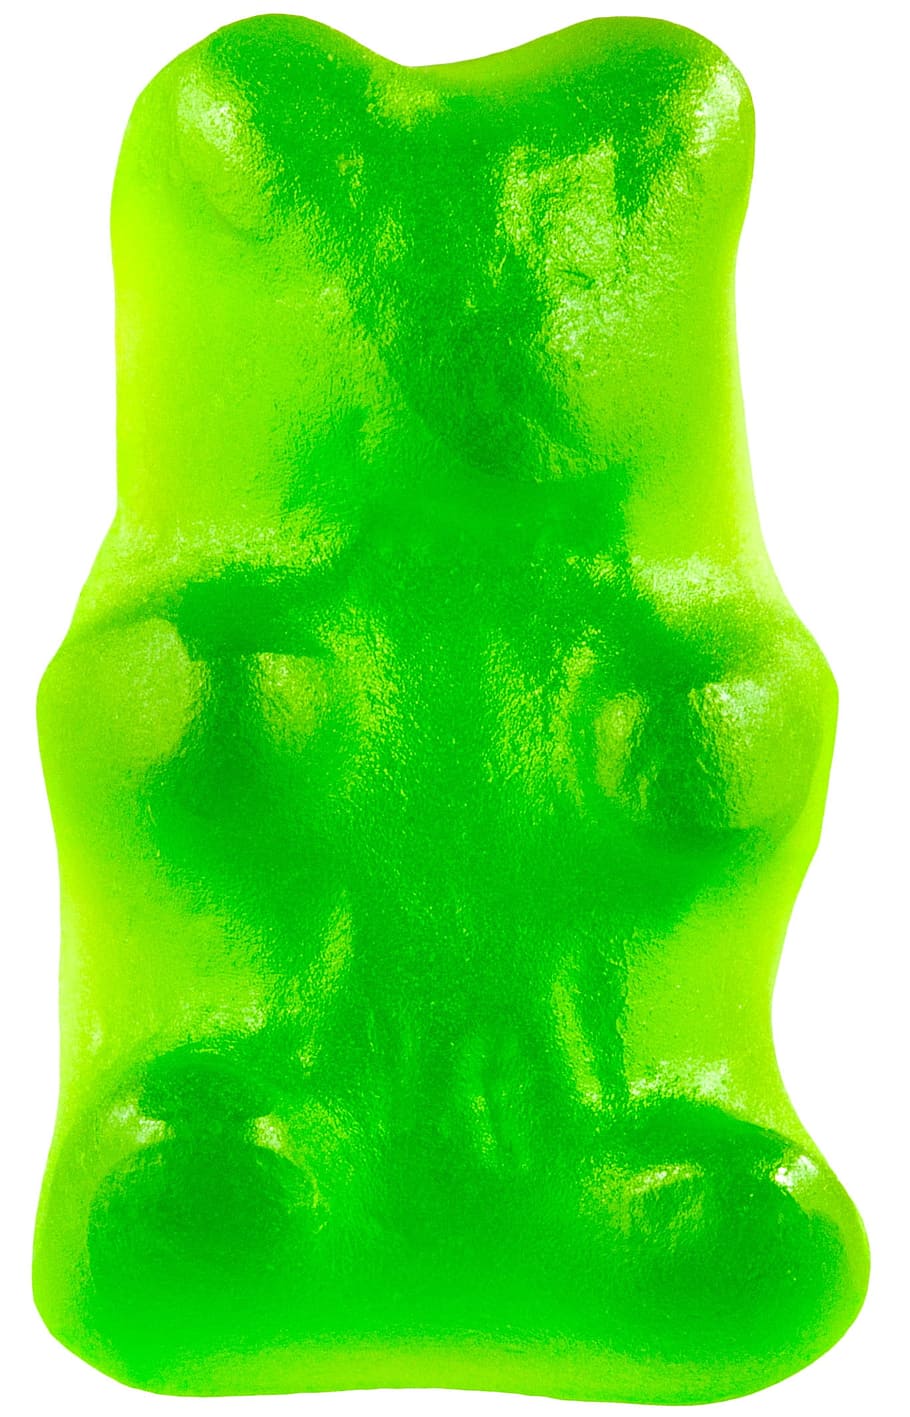 green gummy bear, candy, gummy bear, green, gummy, sugar, sweet, food, jelly, colorful